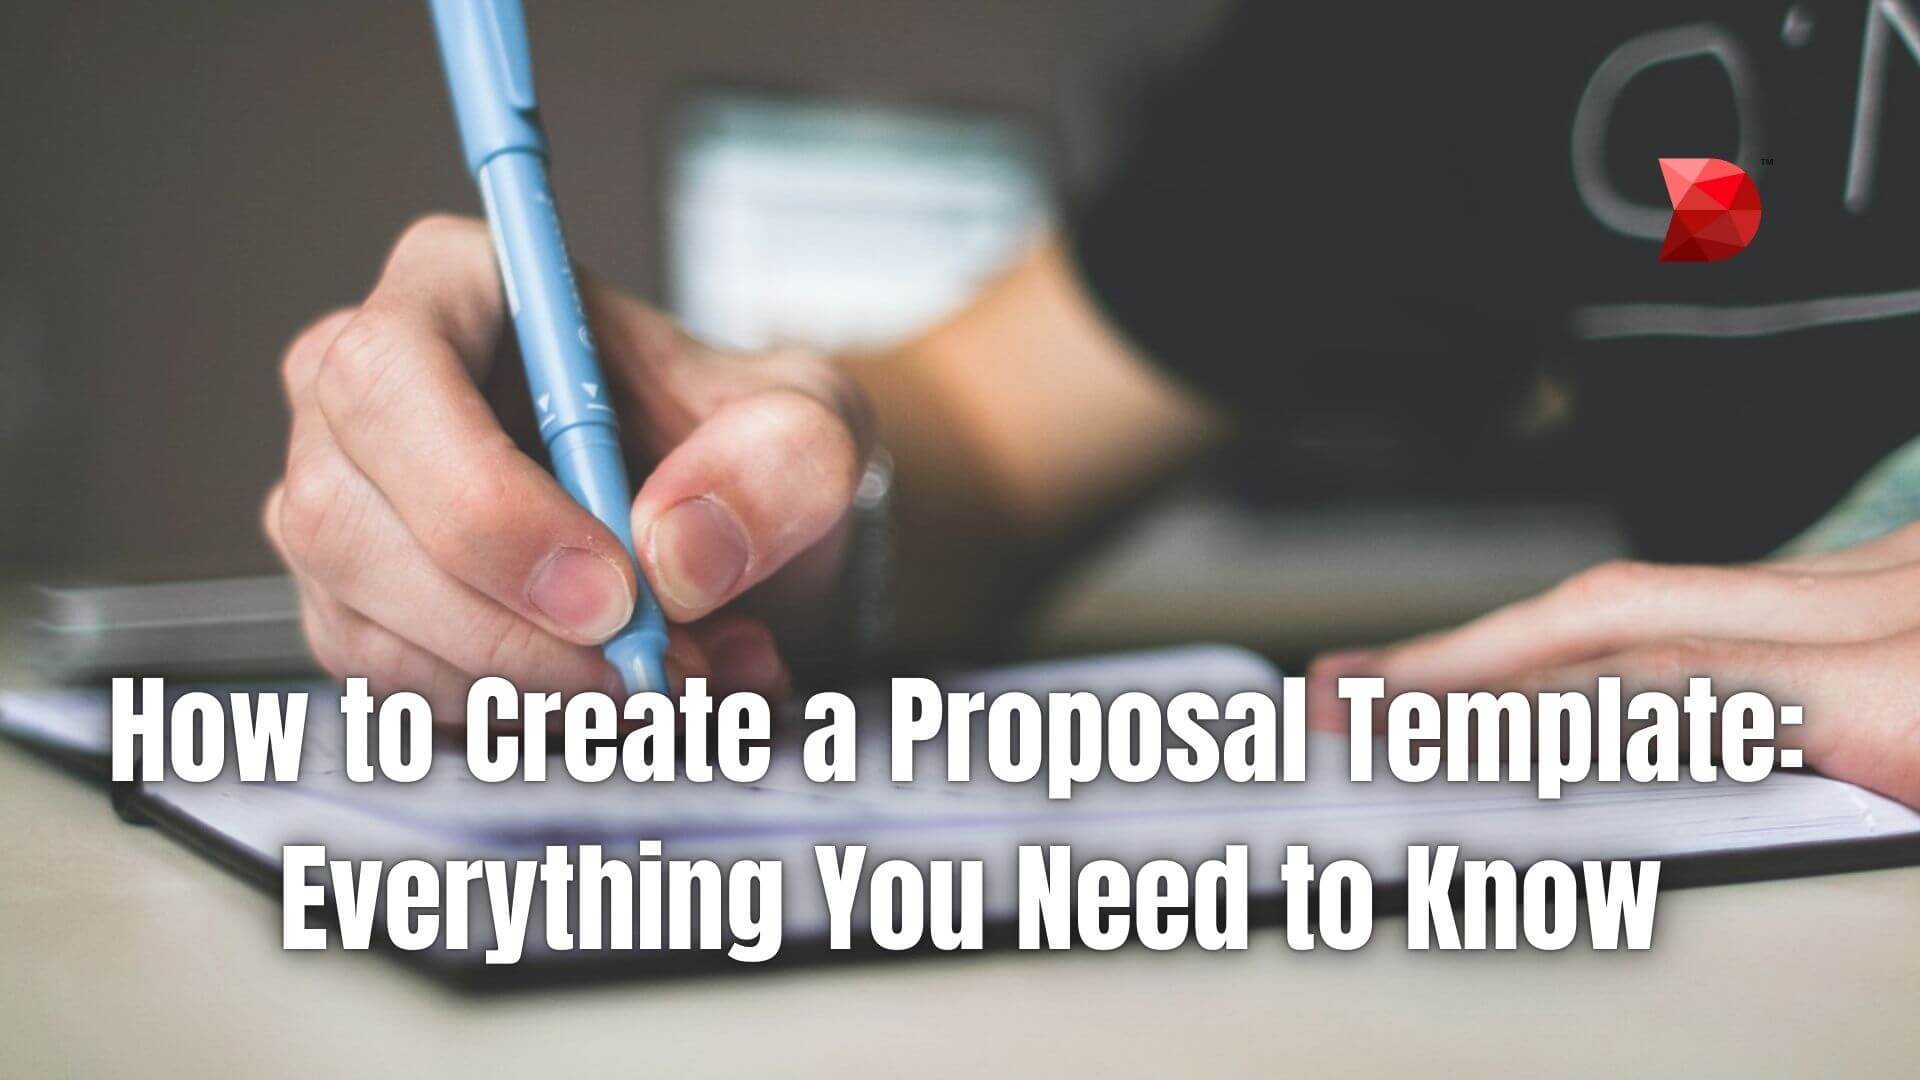 How to Create a Proposal Template Everything You Need to Know